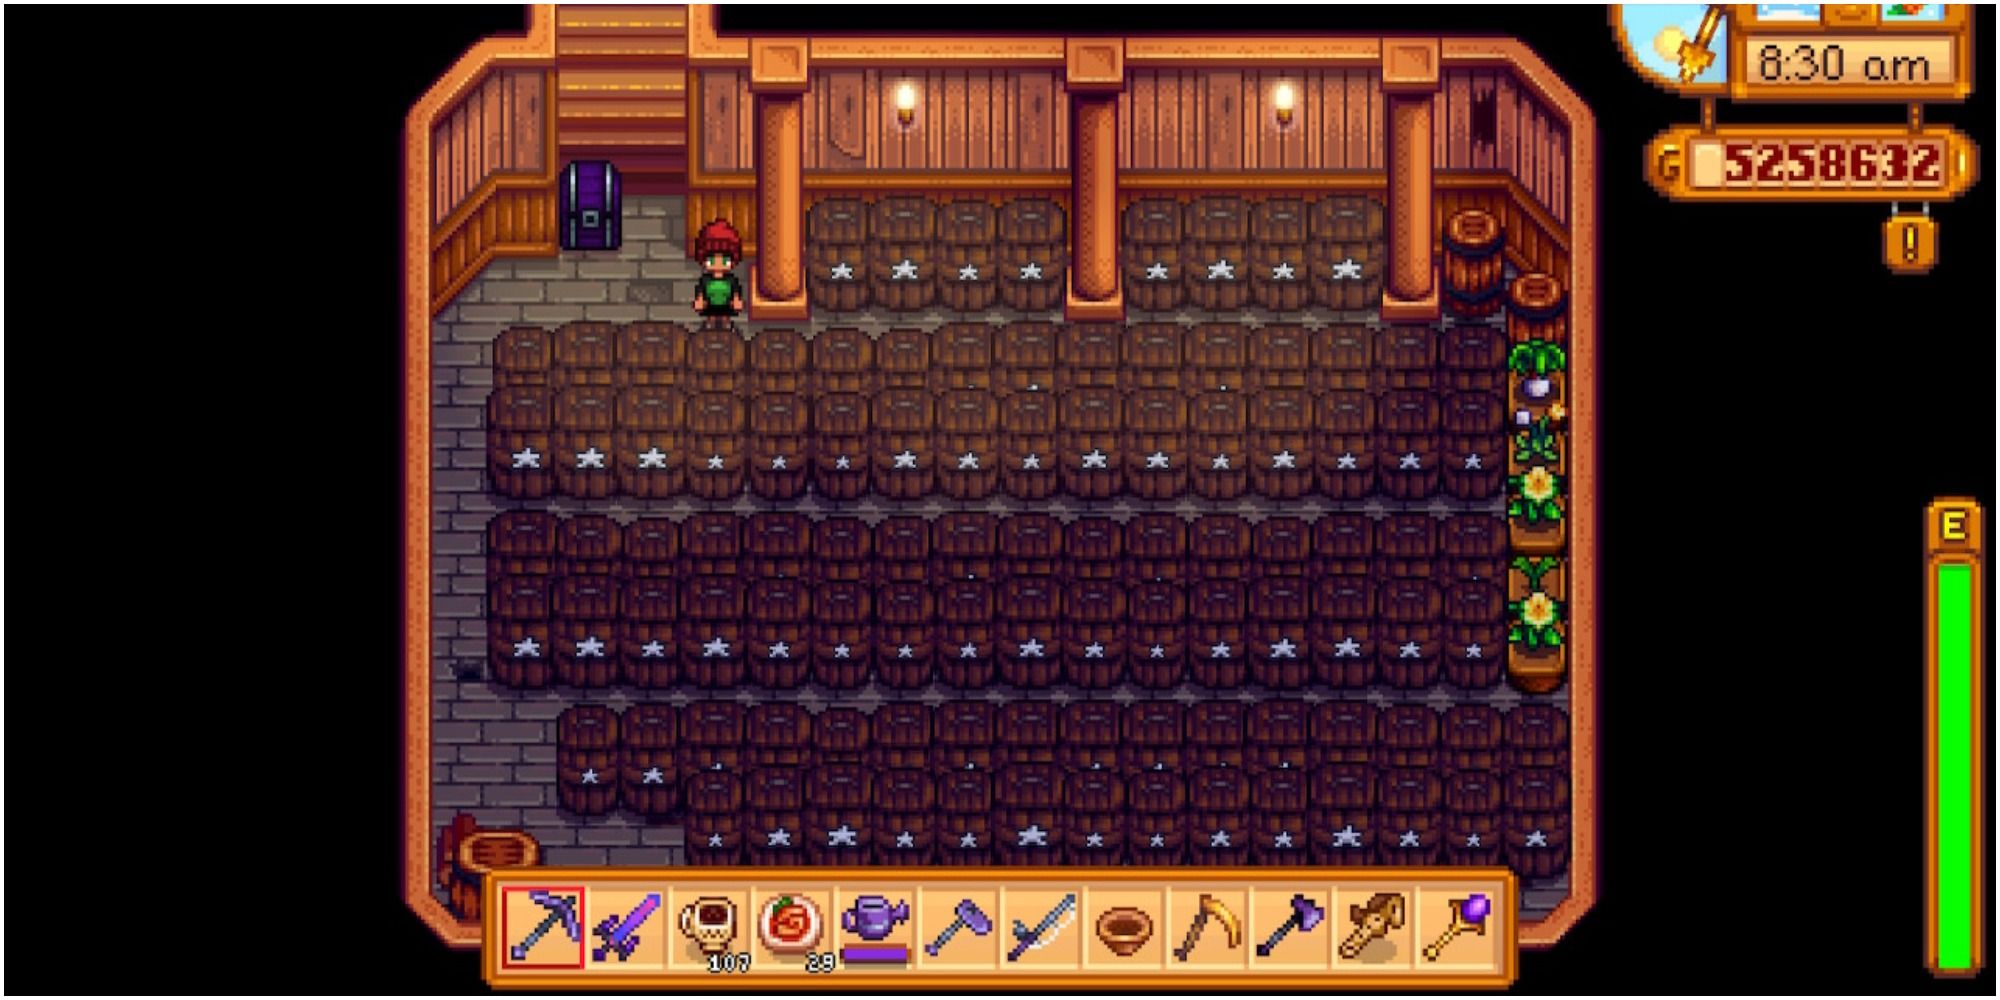 Stardew Valley: An image of a cellar full of Casks.